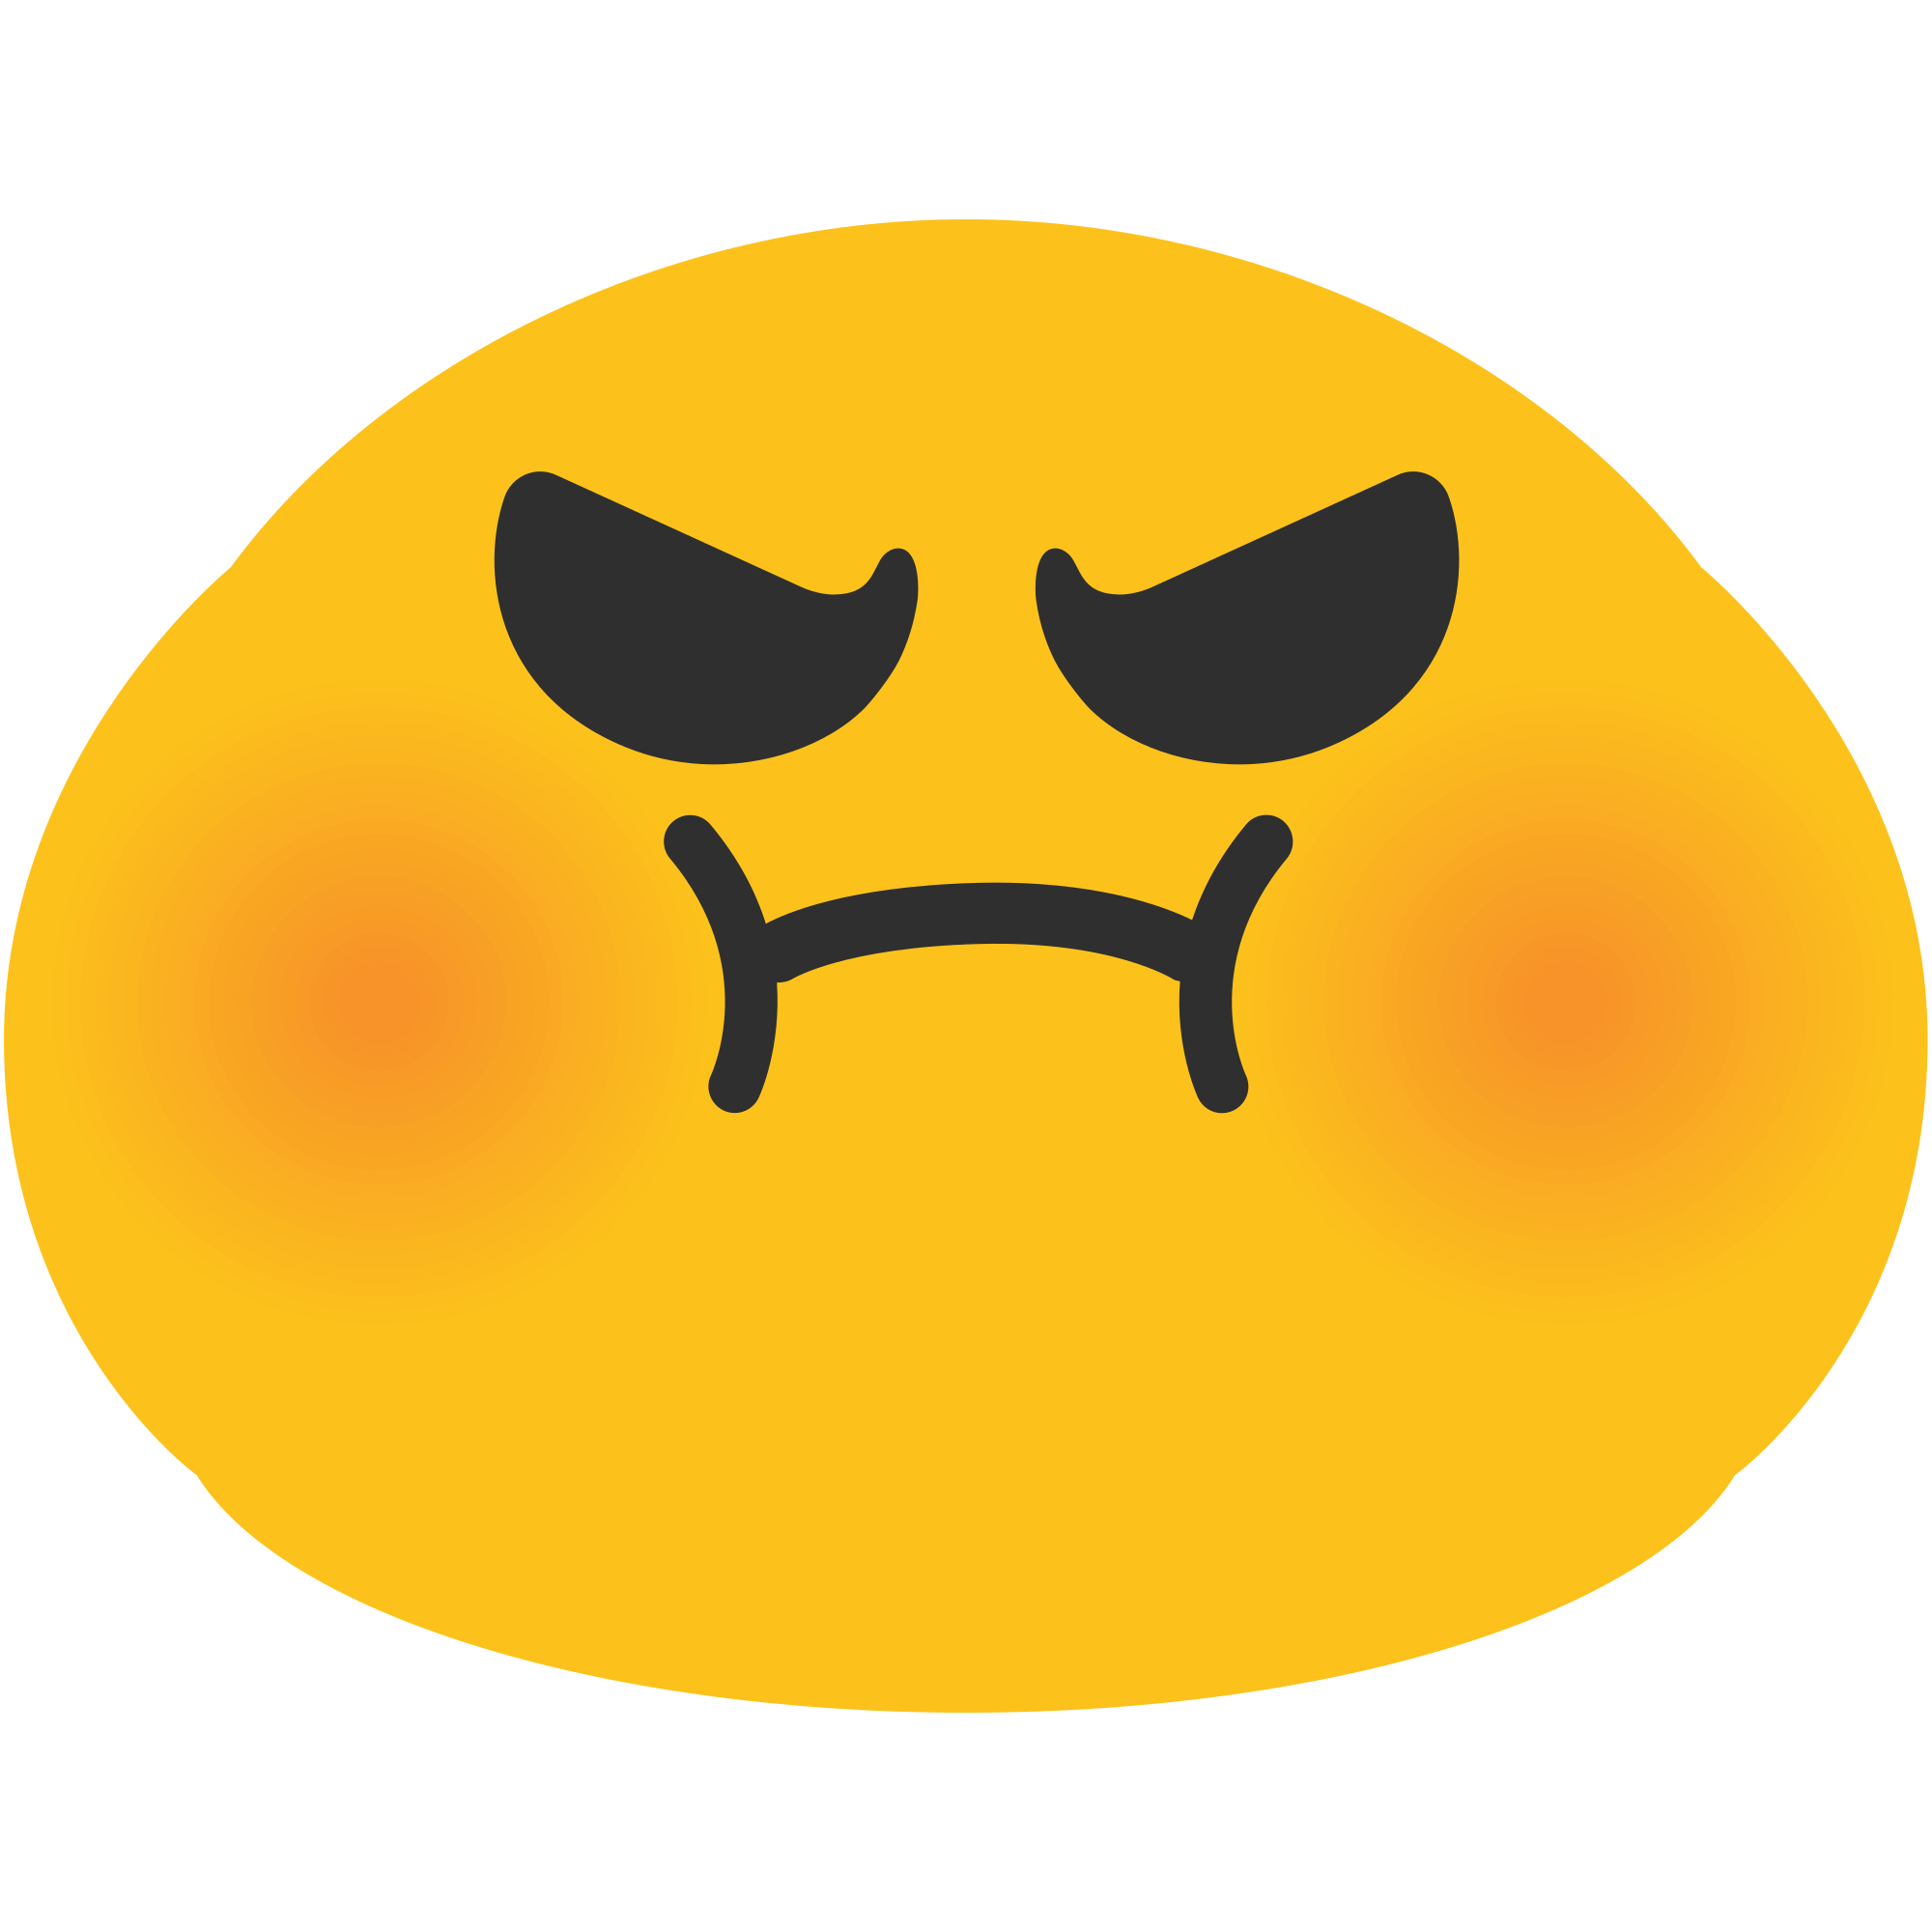 Mad Face Emoji Transparent #1520739 (License: Personal Use) .